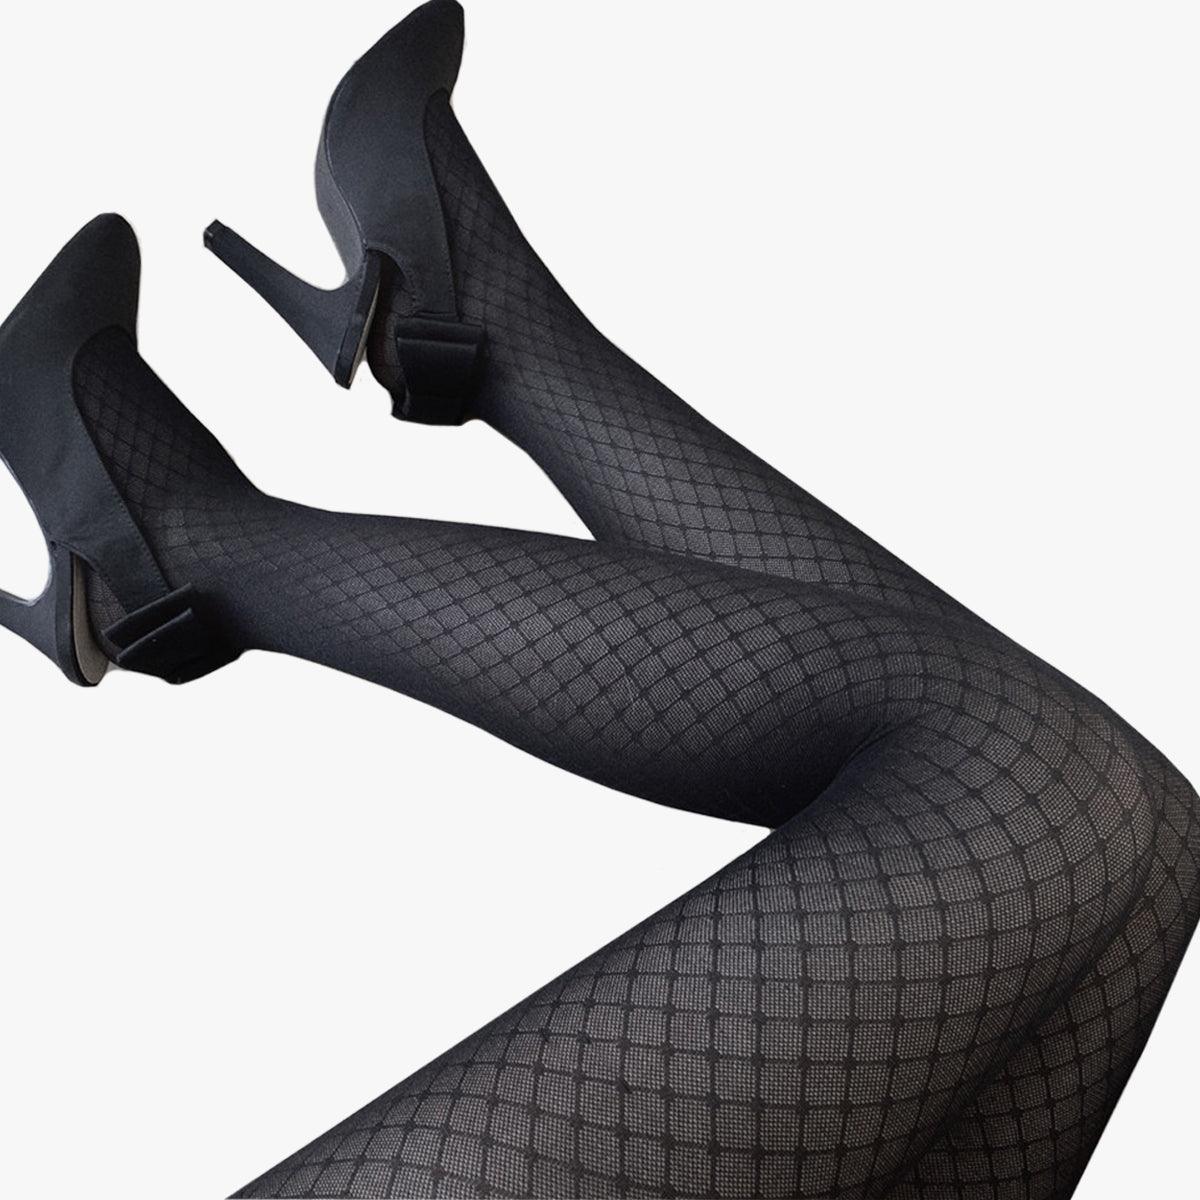 Dark Net Black Tights Goth Aesthetic - Aesthetic Clothes Shop